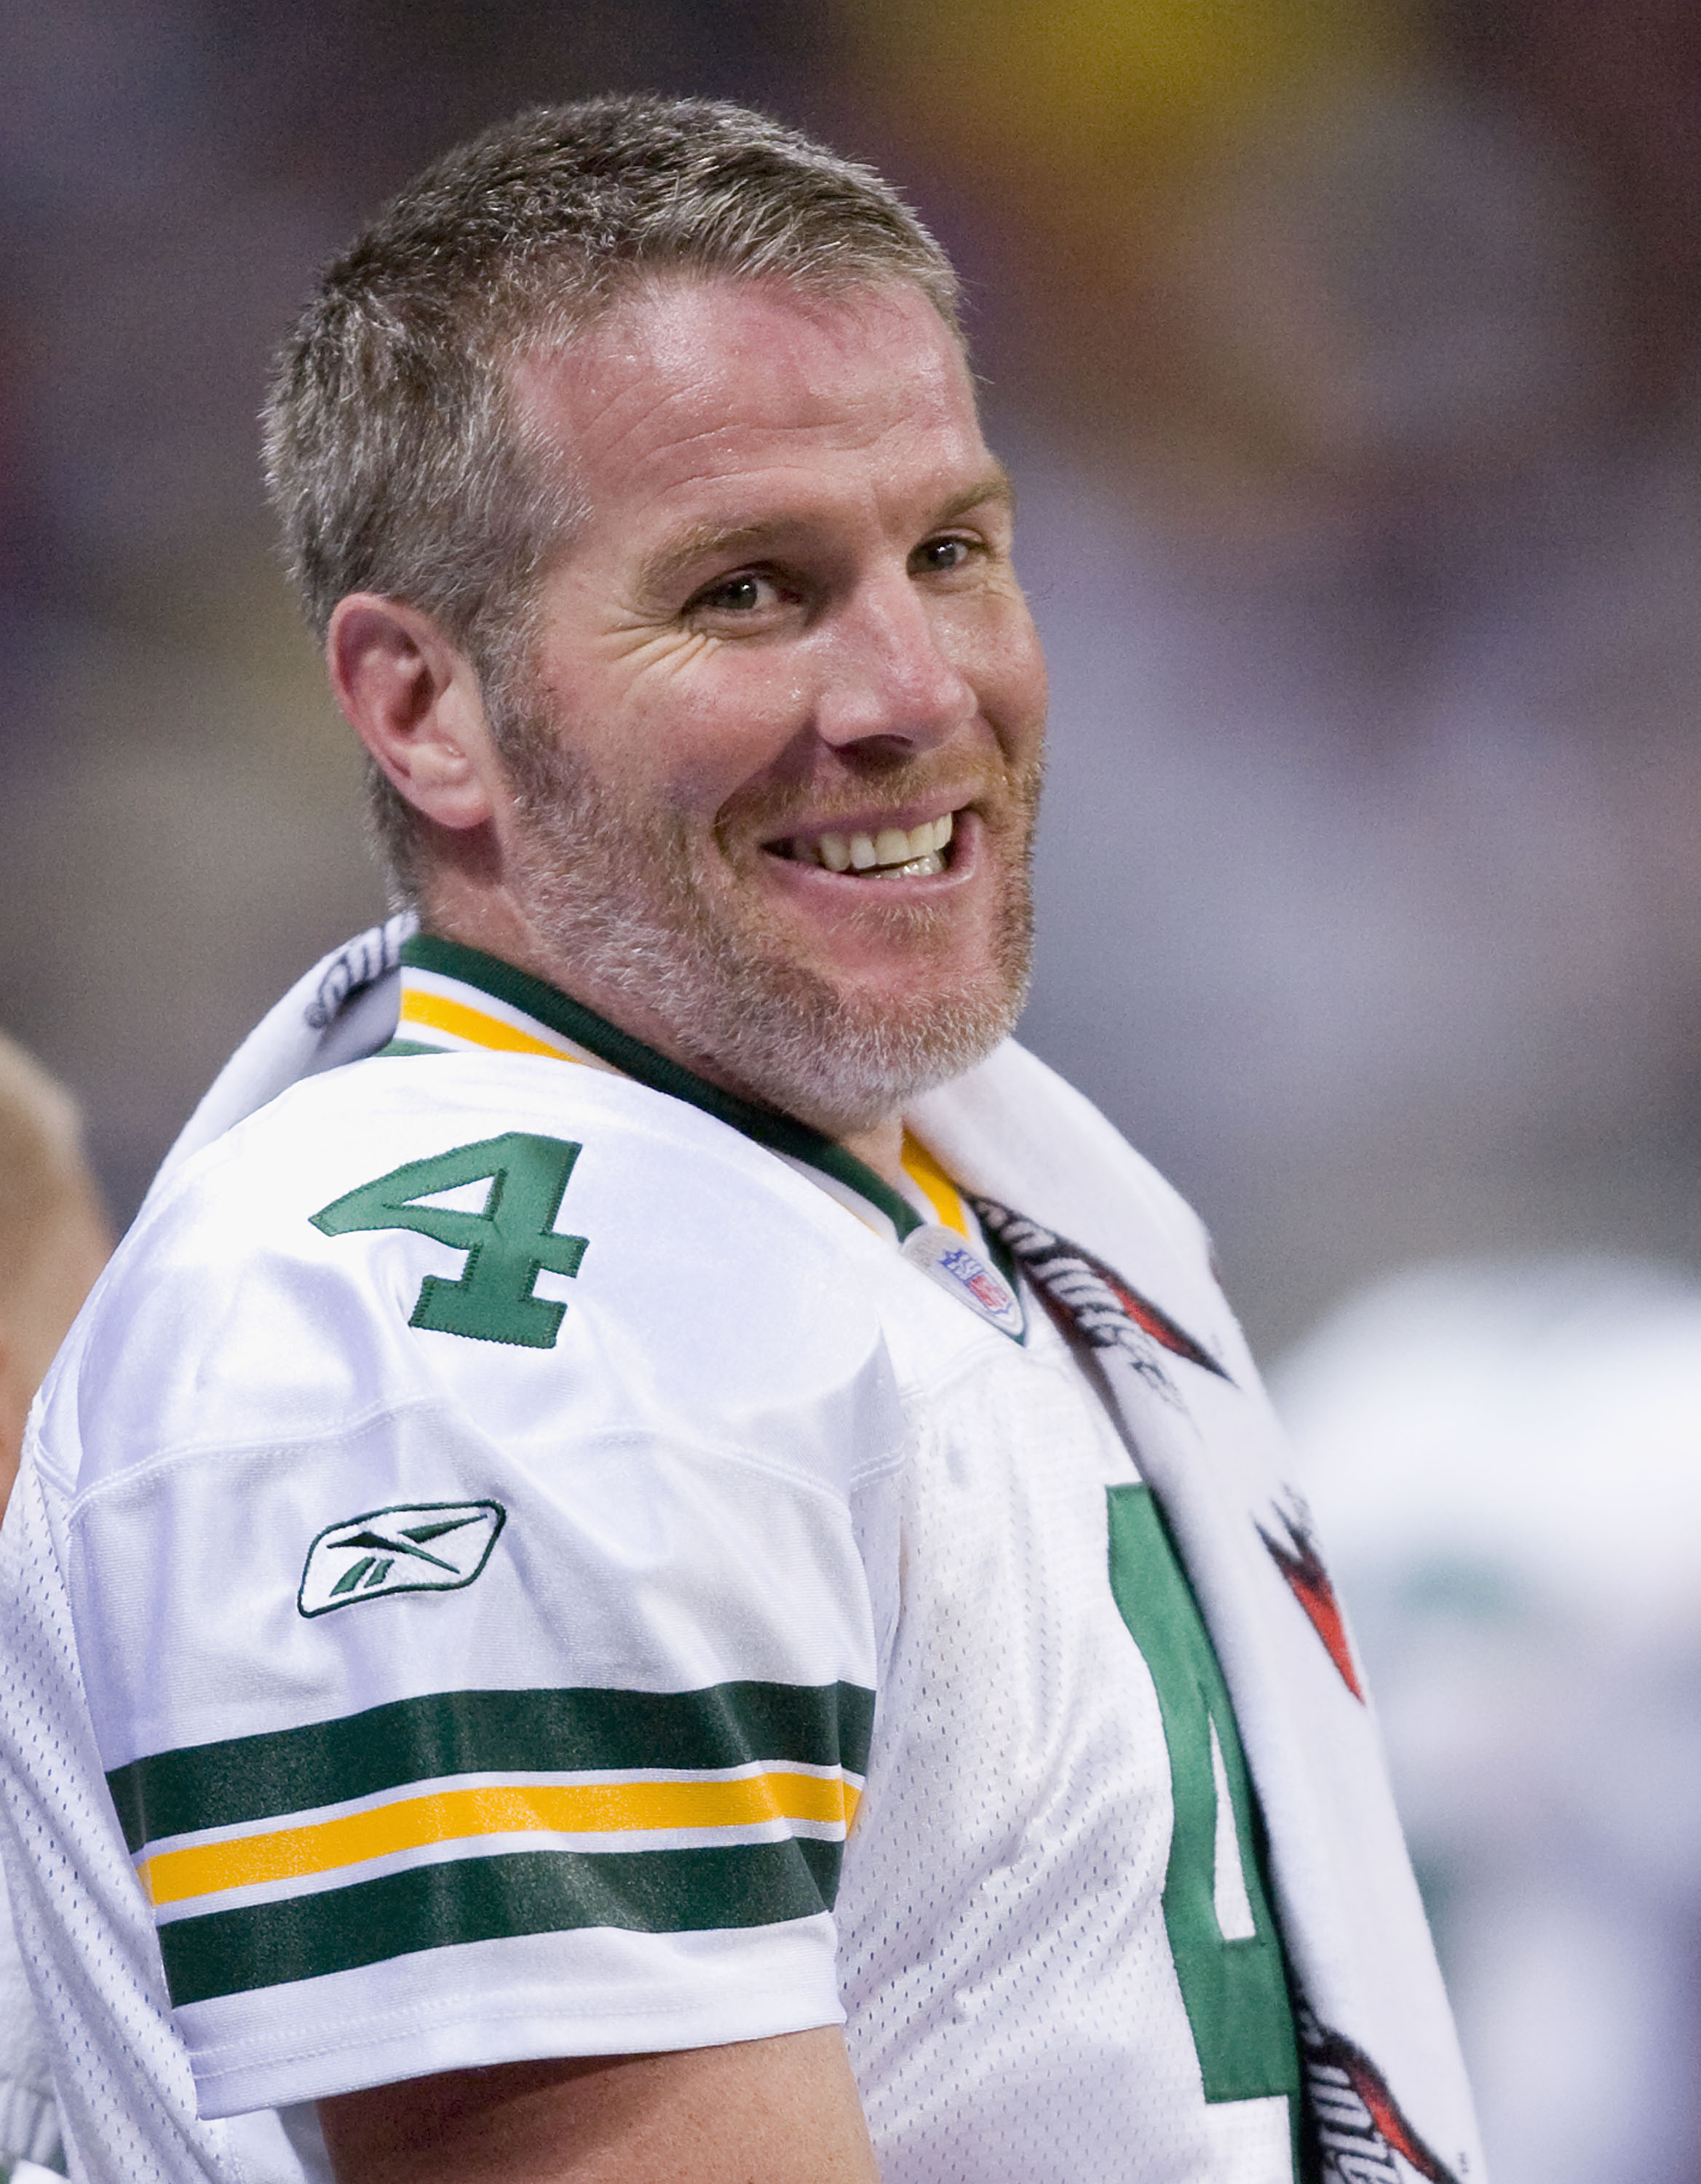 ST. LOUIS, MO - DECEMBER 16: Brett Favre #4 of the Green Bay Packers laughs while on the sideline against the St. Louis Rams at the Edward Jones Dome December 16, 2007 in St. Louis, Missouri.  The Packers beat the Rams 33-14.  (Photo by Dilip Vishwanat/Ge